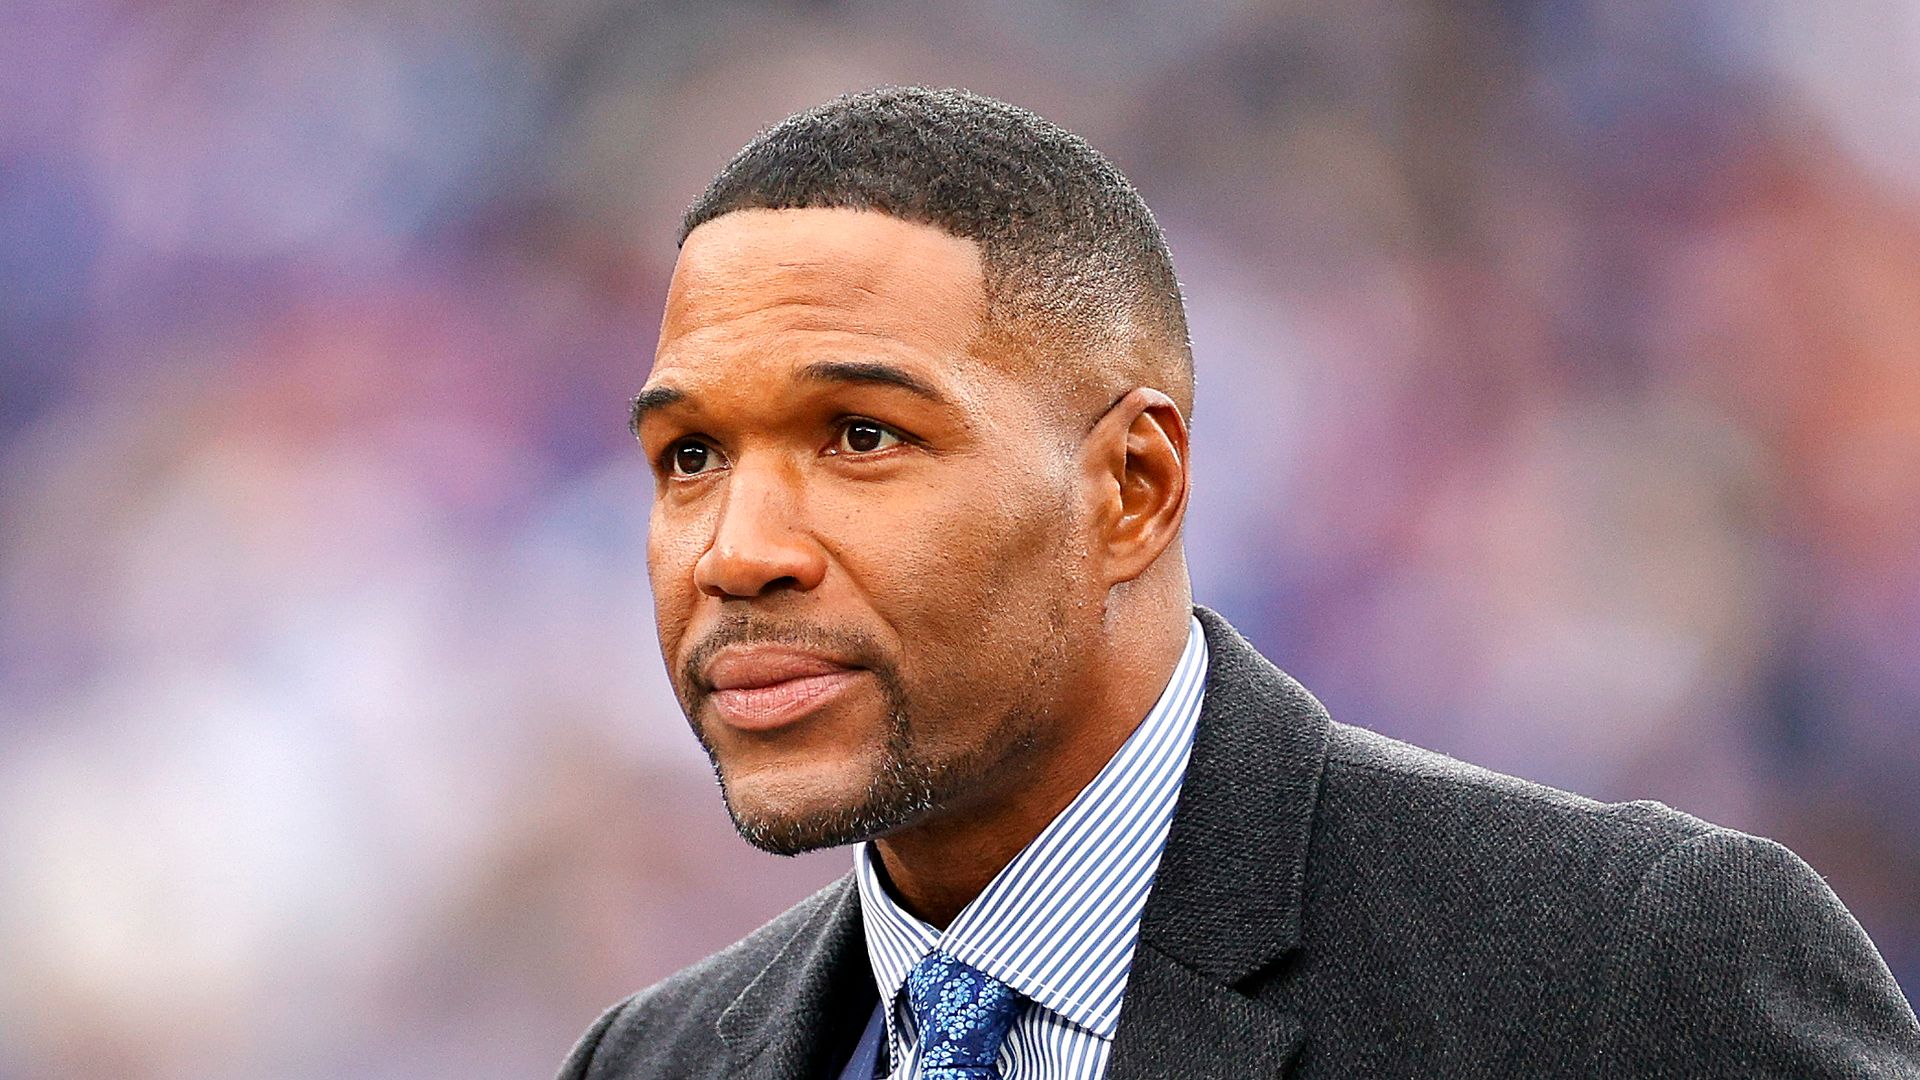 Former New York Giants player Michael Strahan speaks during the ceremony to retire his number at half time of the game between the Philadelphia Eagles and the New York Giants at MetLife Stadium on November 28, 2021 in East Rutherford, New Jersey.